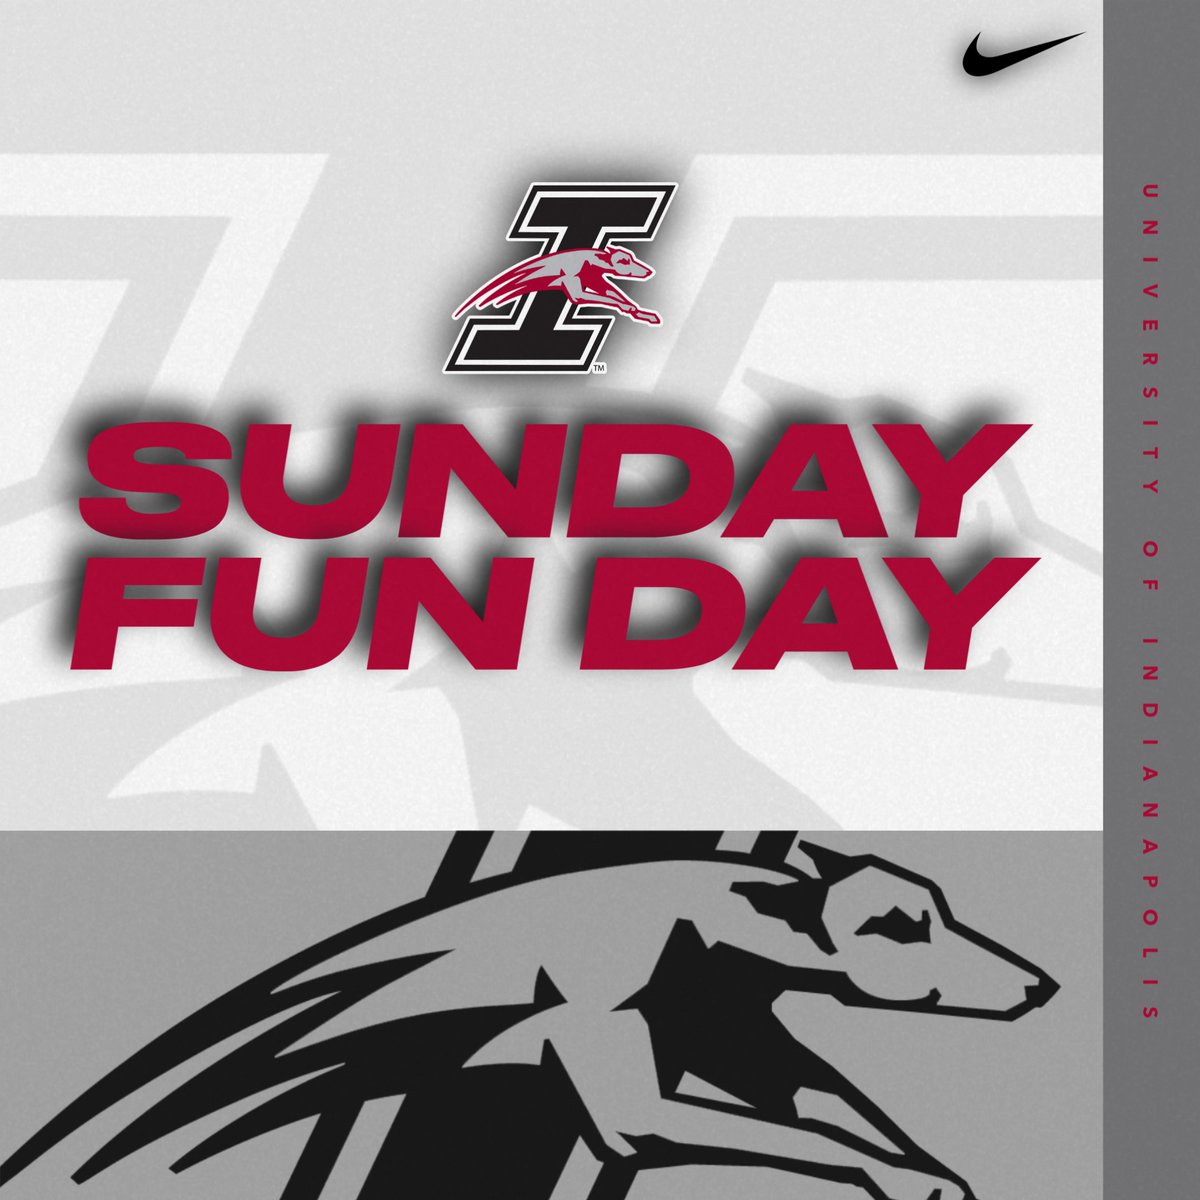 A Sunday Fun Day, indeed, for the hoWnds... ⛳️ 11th #GLVCwgolf crown 🥍 Fourth straight #GLVCwlax title 🥎 Senior day #GLVCsb 🧹, Frost all-time wins ⚾️ Finishes 4-game #GLVCbase 🧹 of Truman